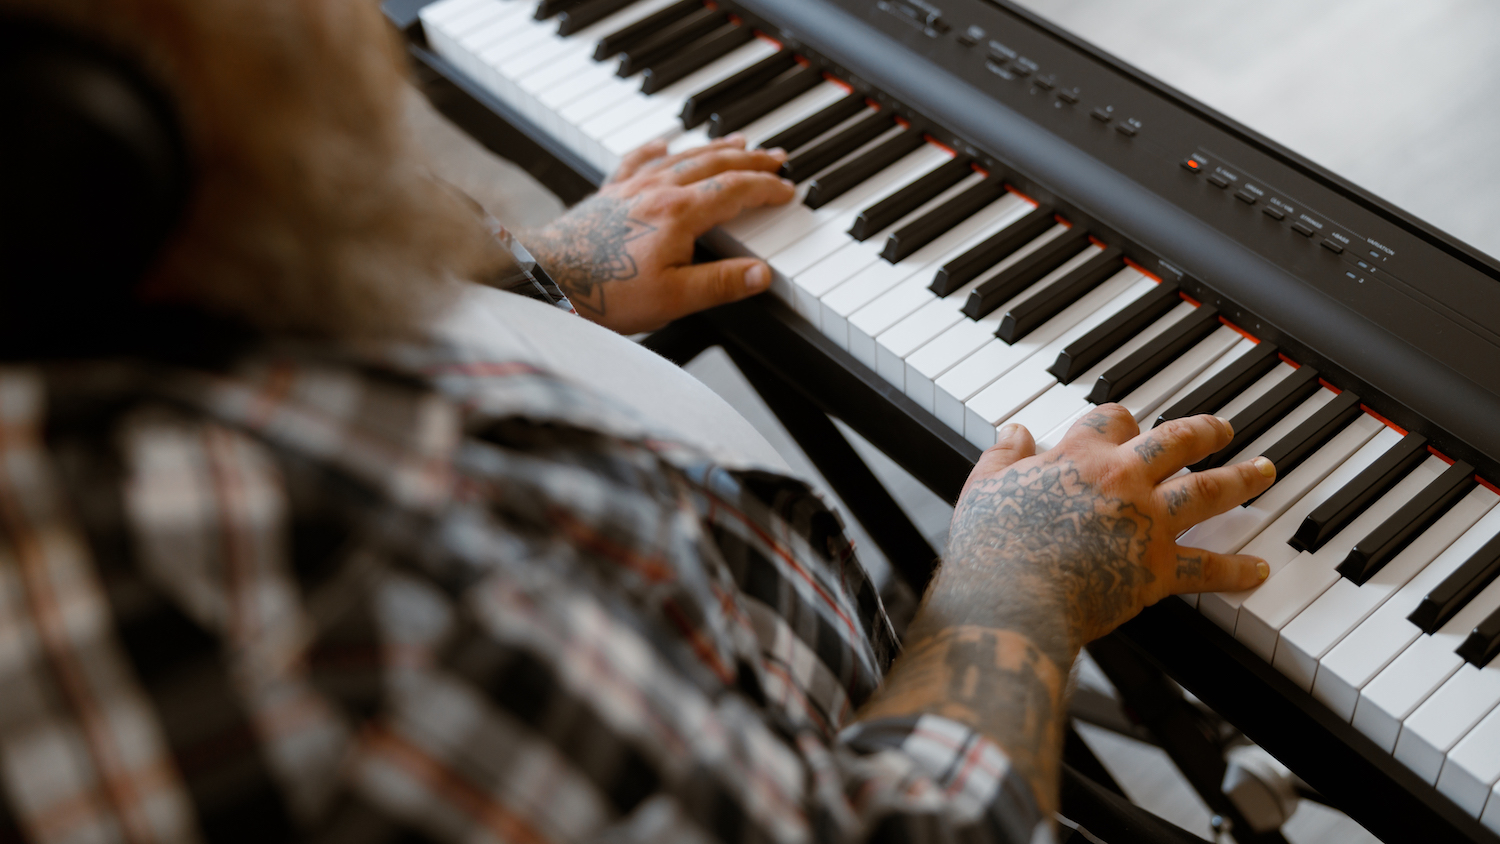 Best Piano Class to Ensure a Sure Win Music Career